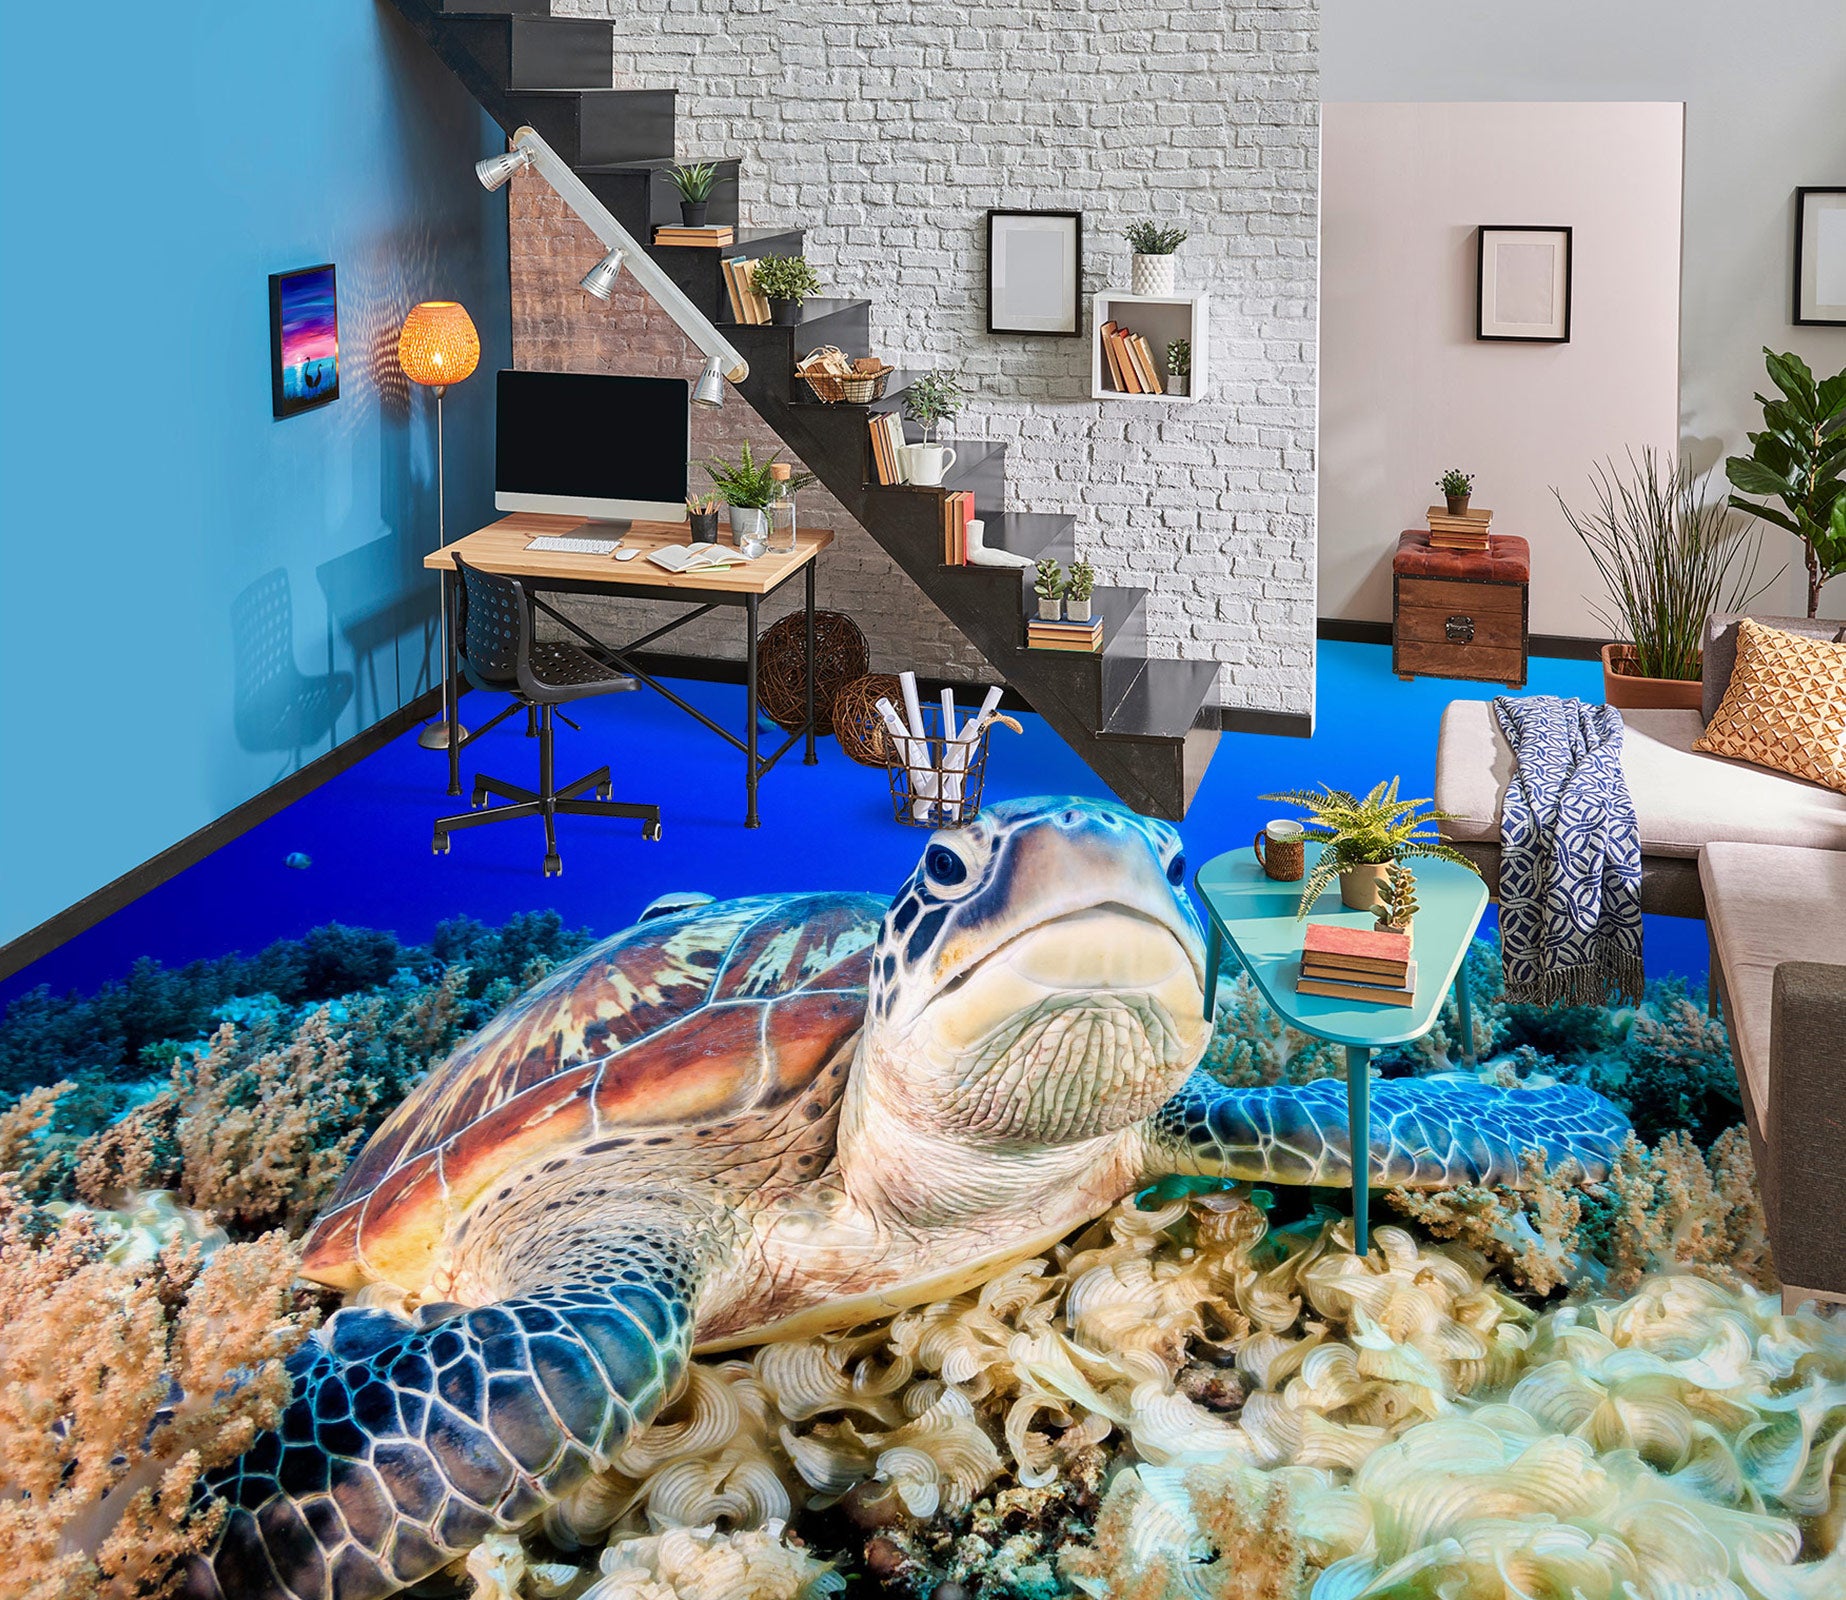 3D Serious Turtle 1392 Floor Mural  Wallpaper Murals Self-Adhesive Removable Print Epoxy